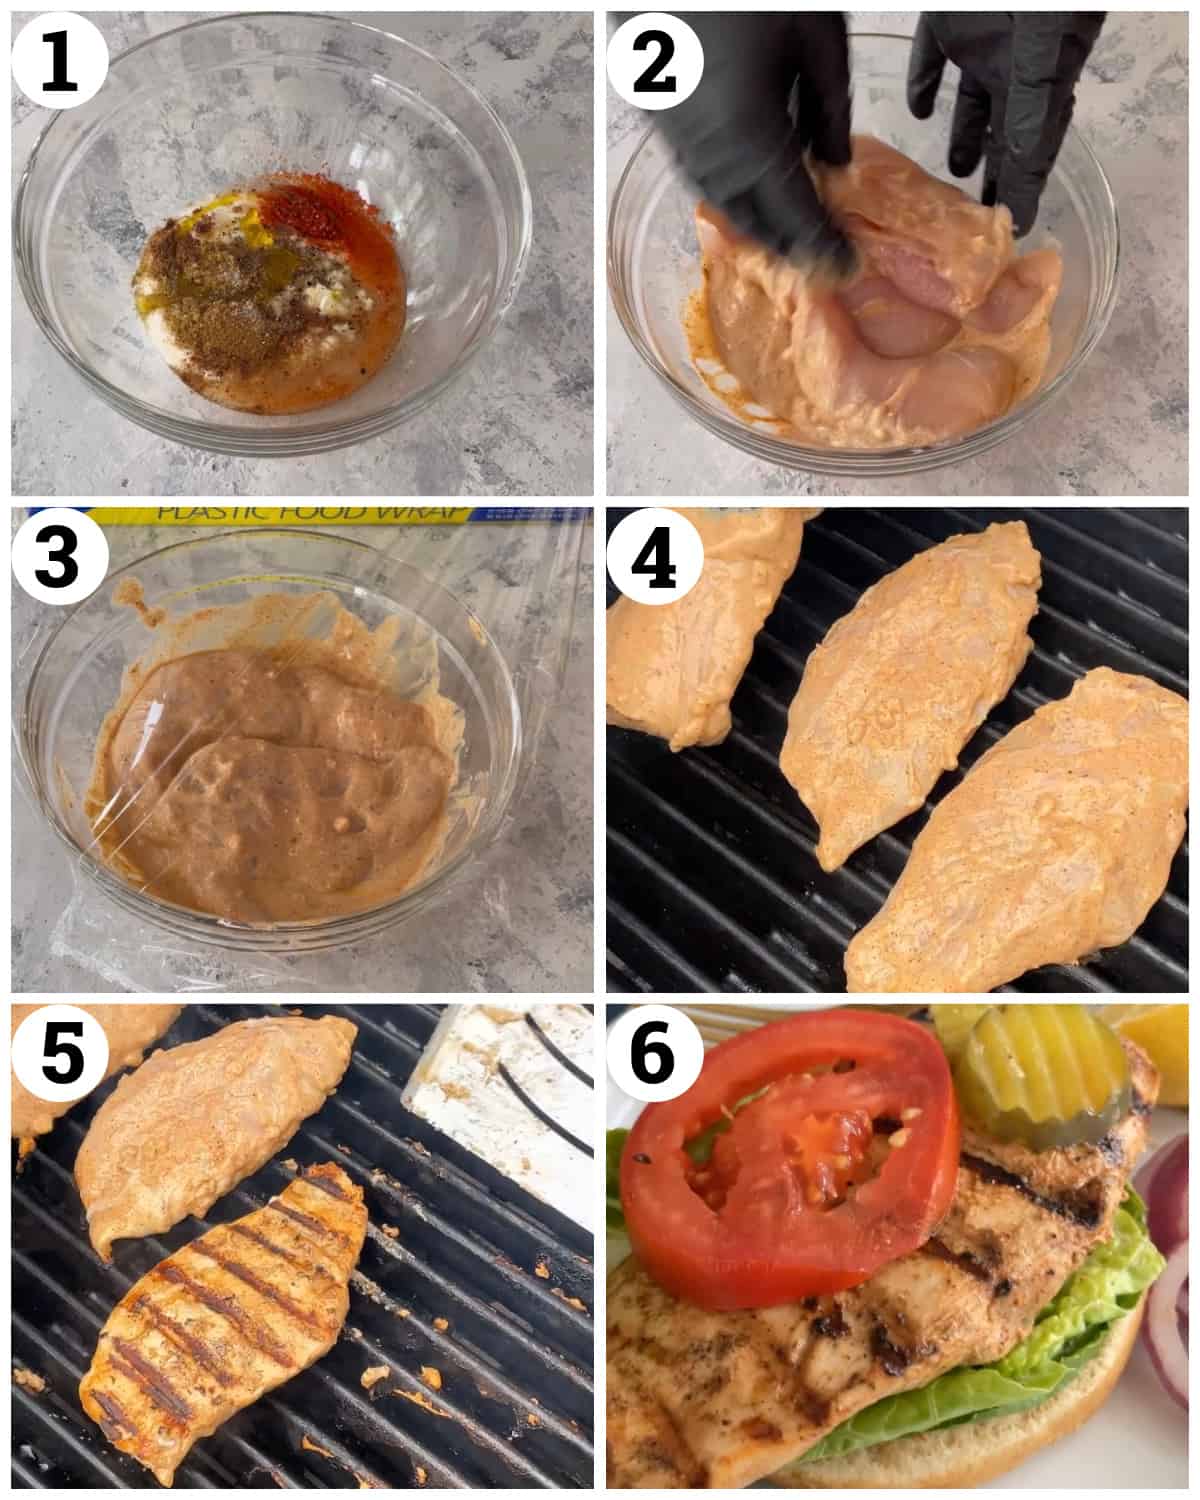 marinate the chicken for 2 to 6 hours. Grill for 5 minutes on each side and assemble the sandwiches. 